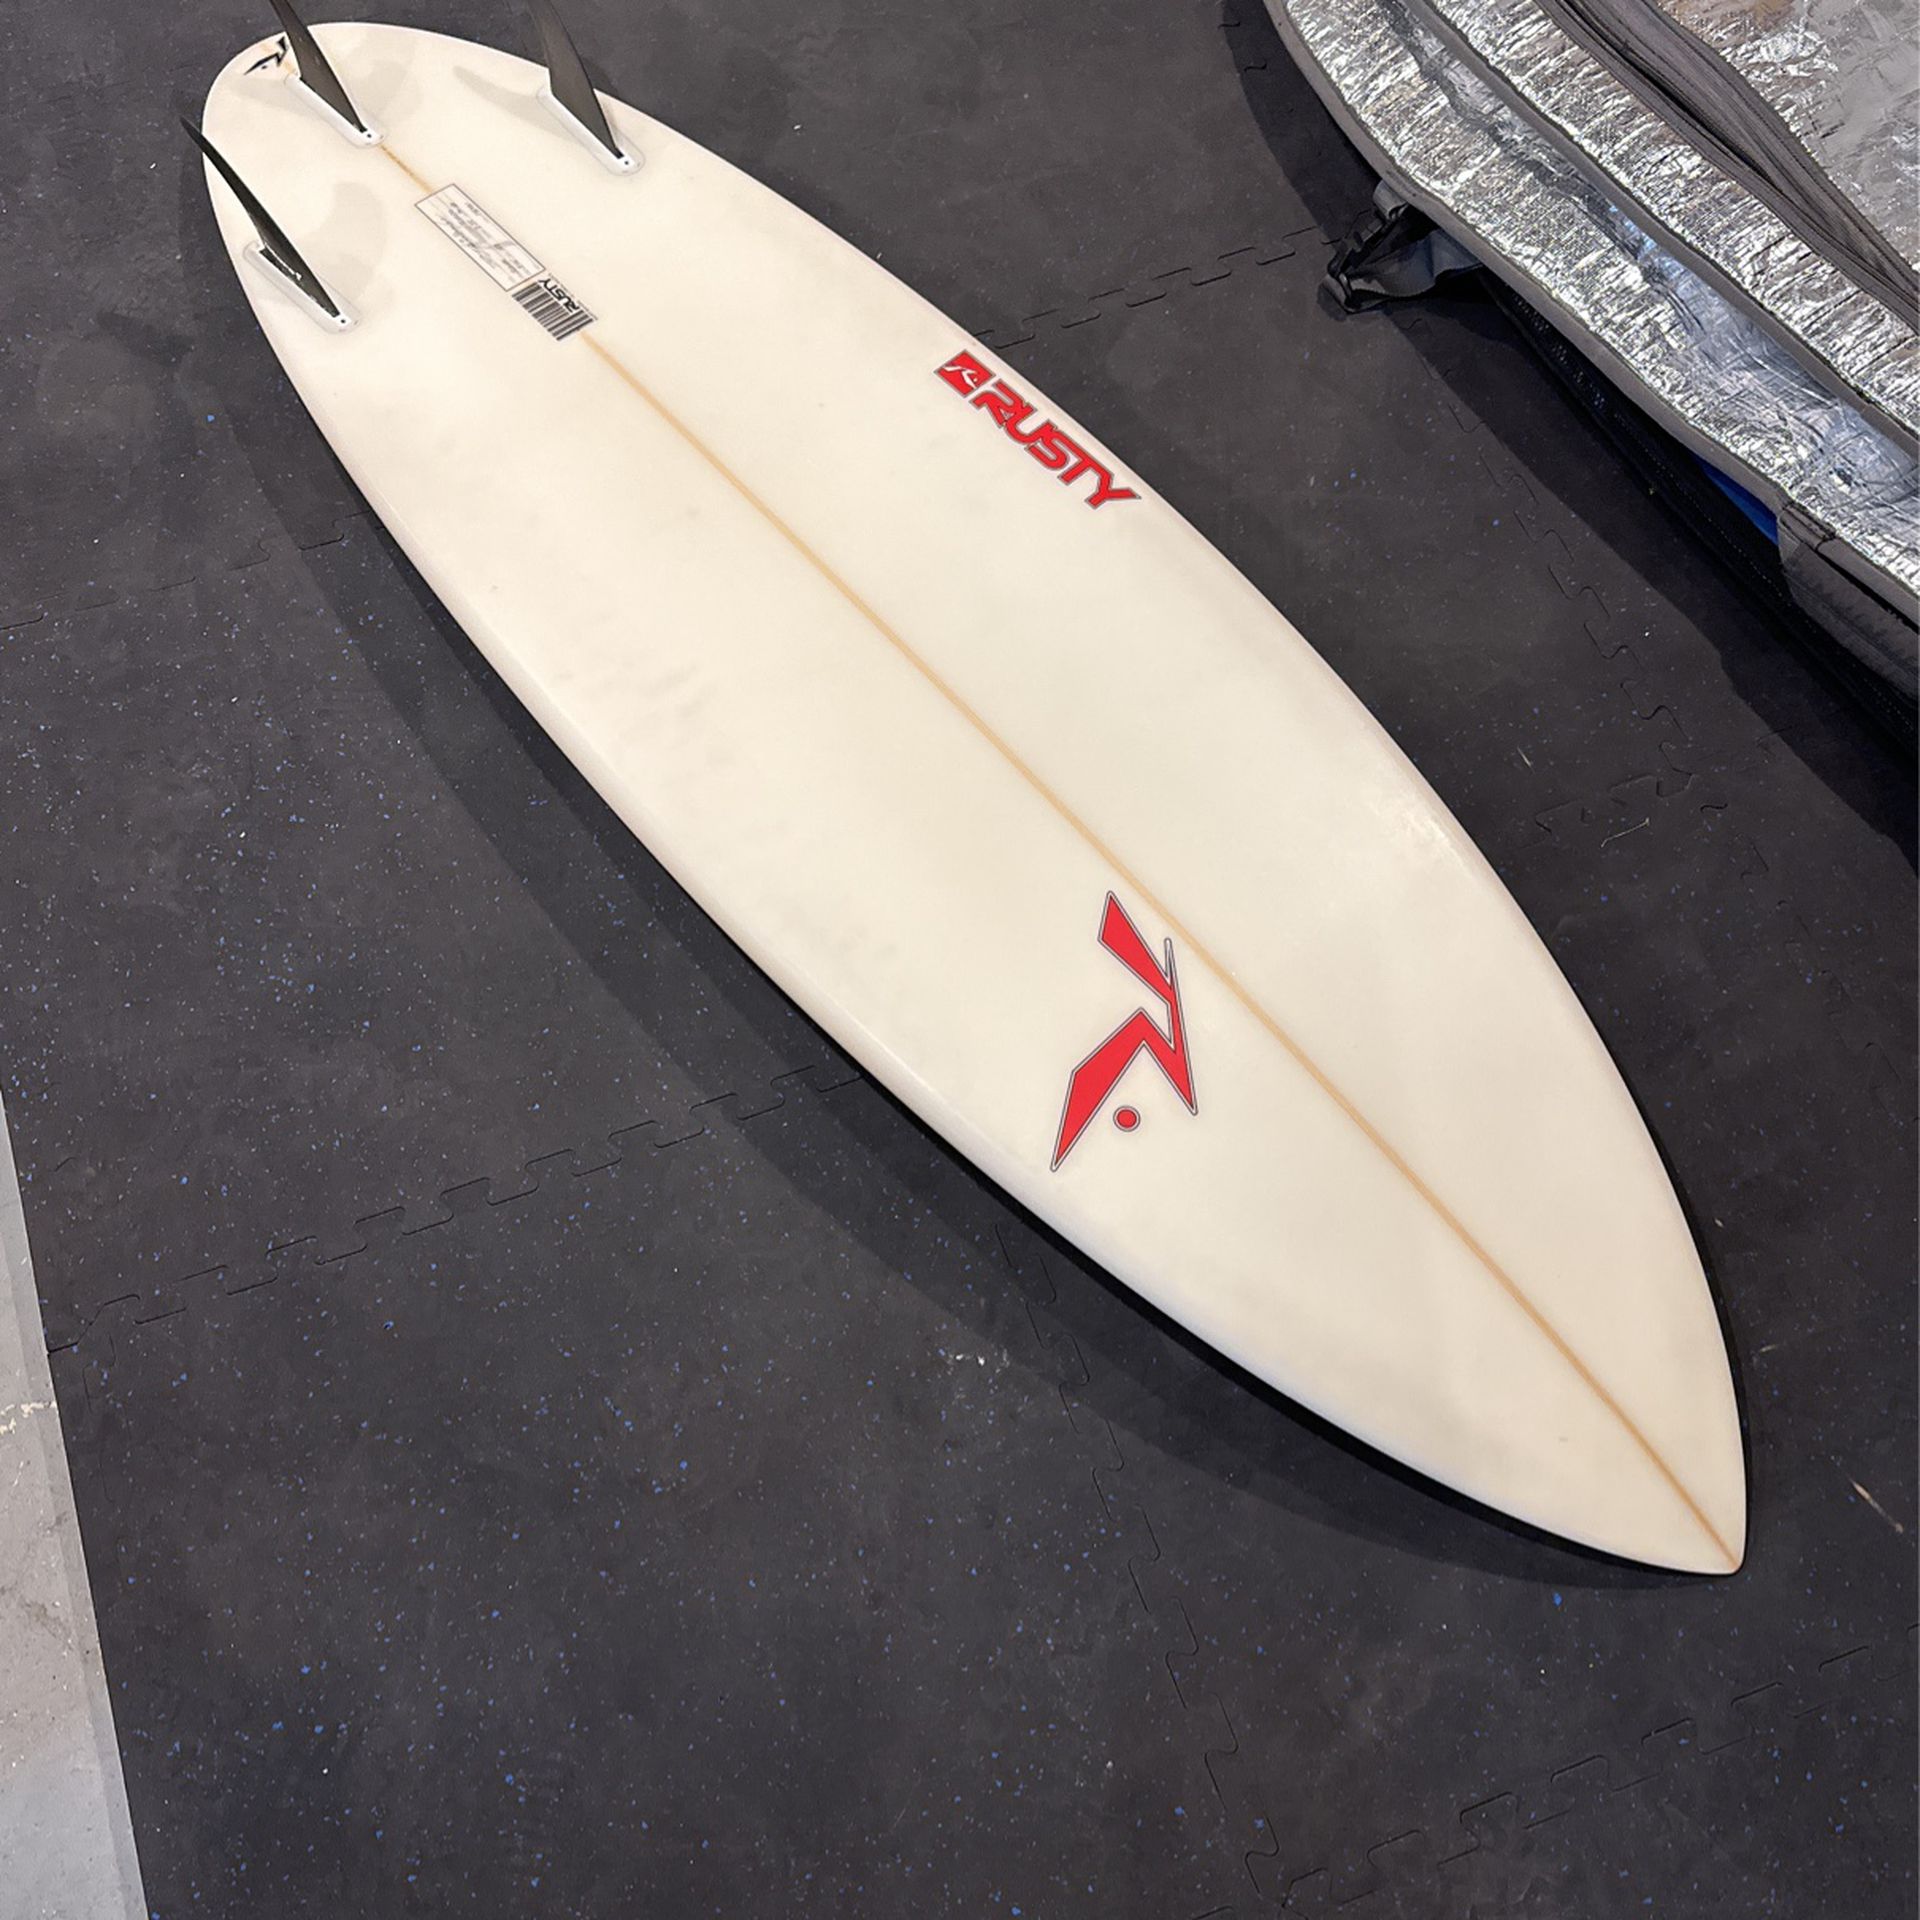 Rusty Slayer 5’10” Surfboard - Excellent Condition!